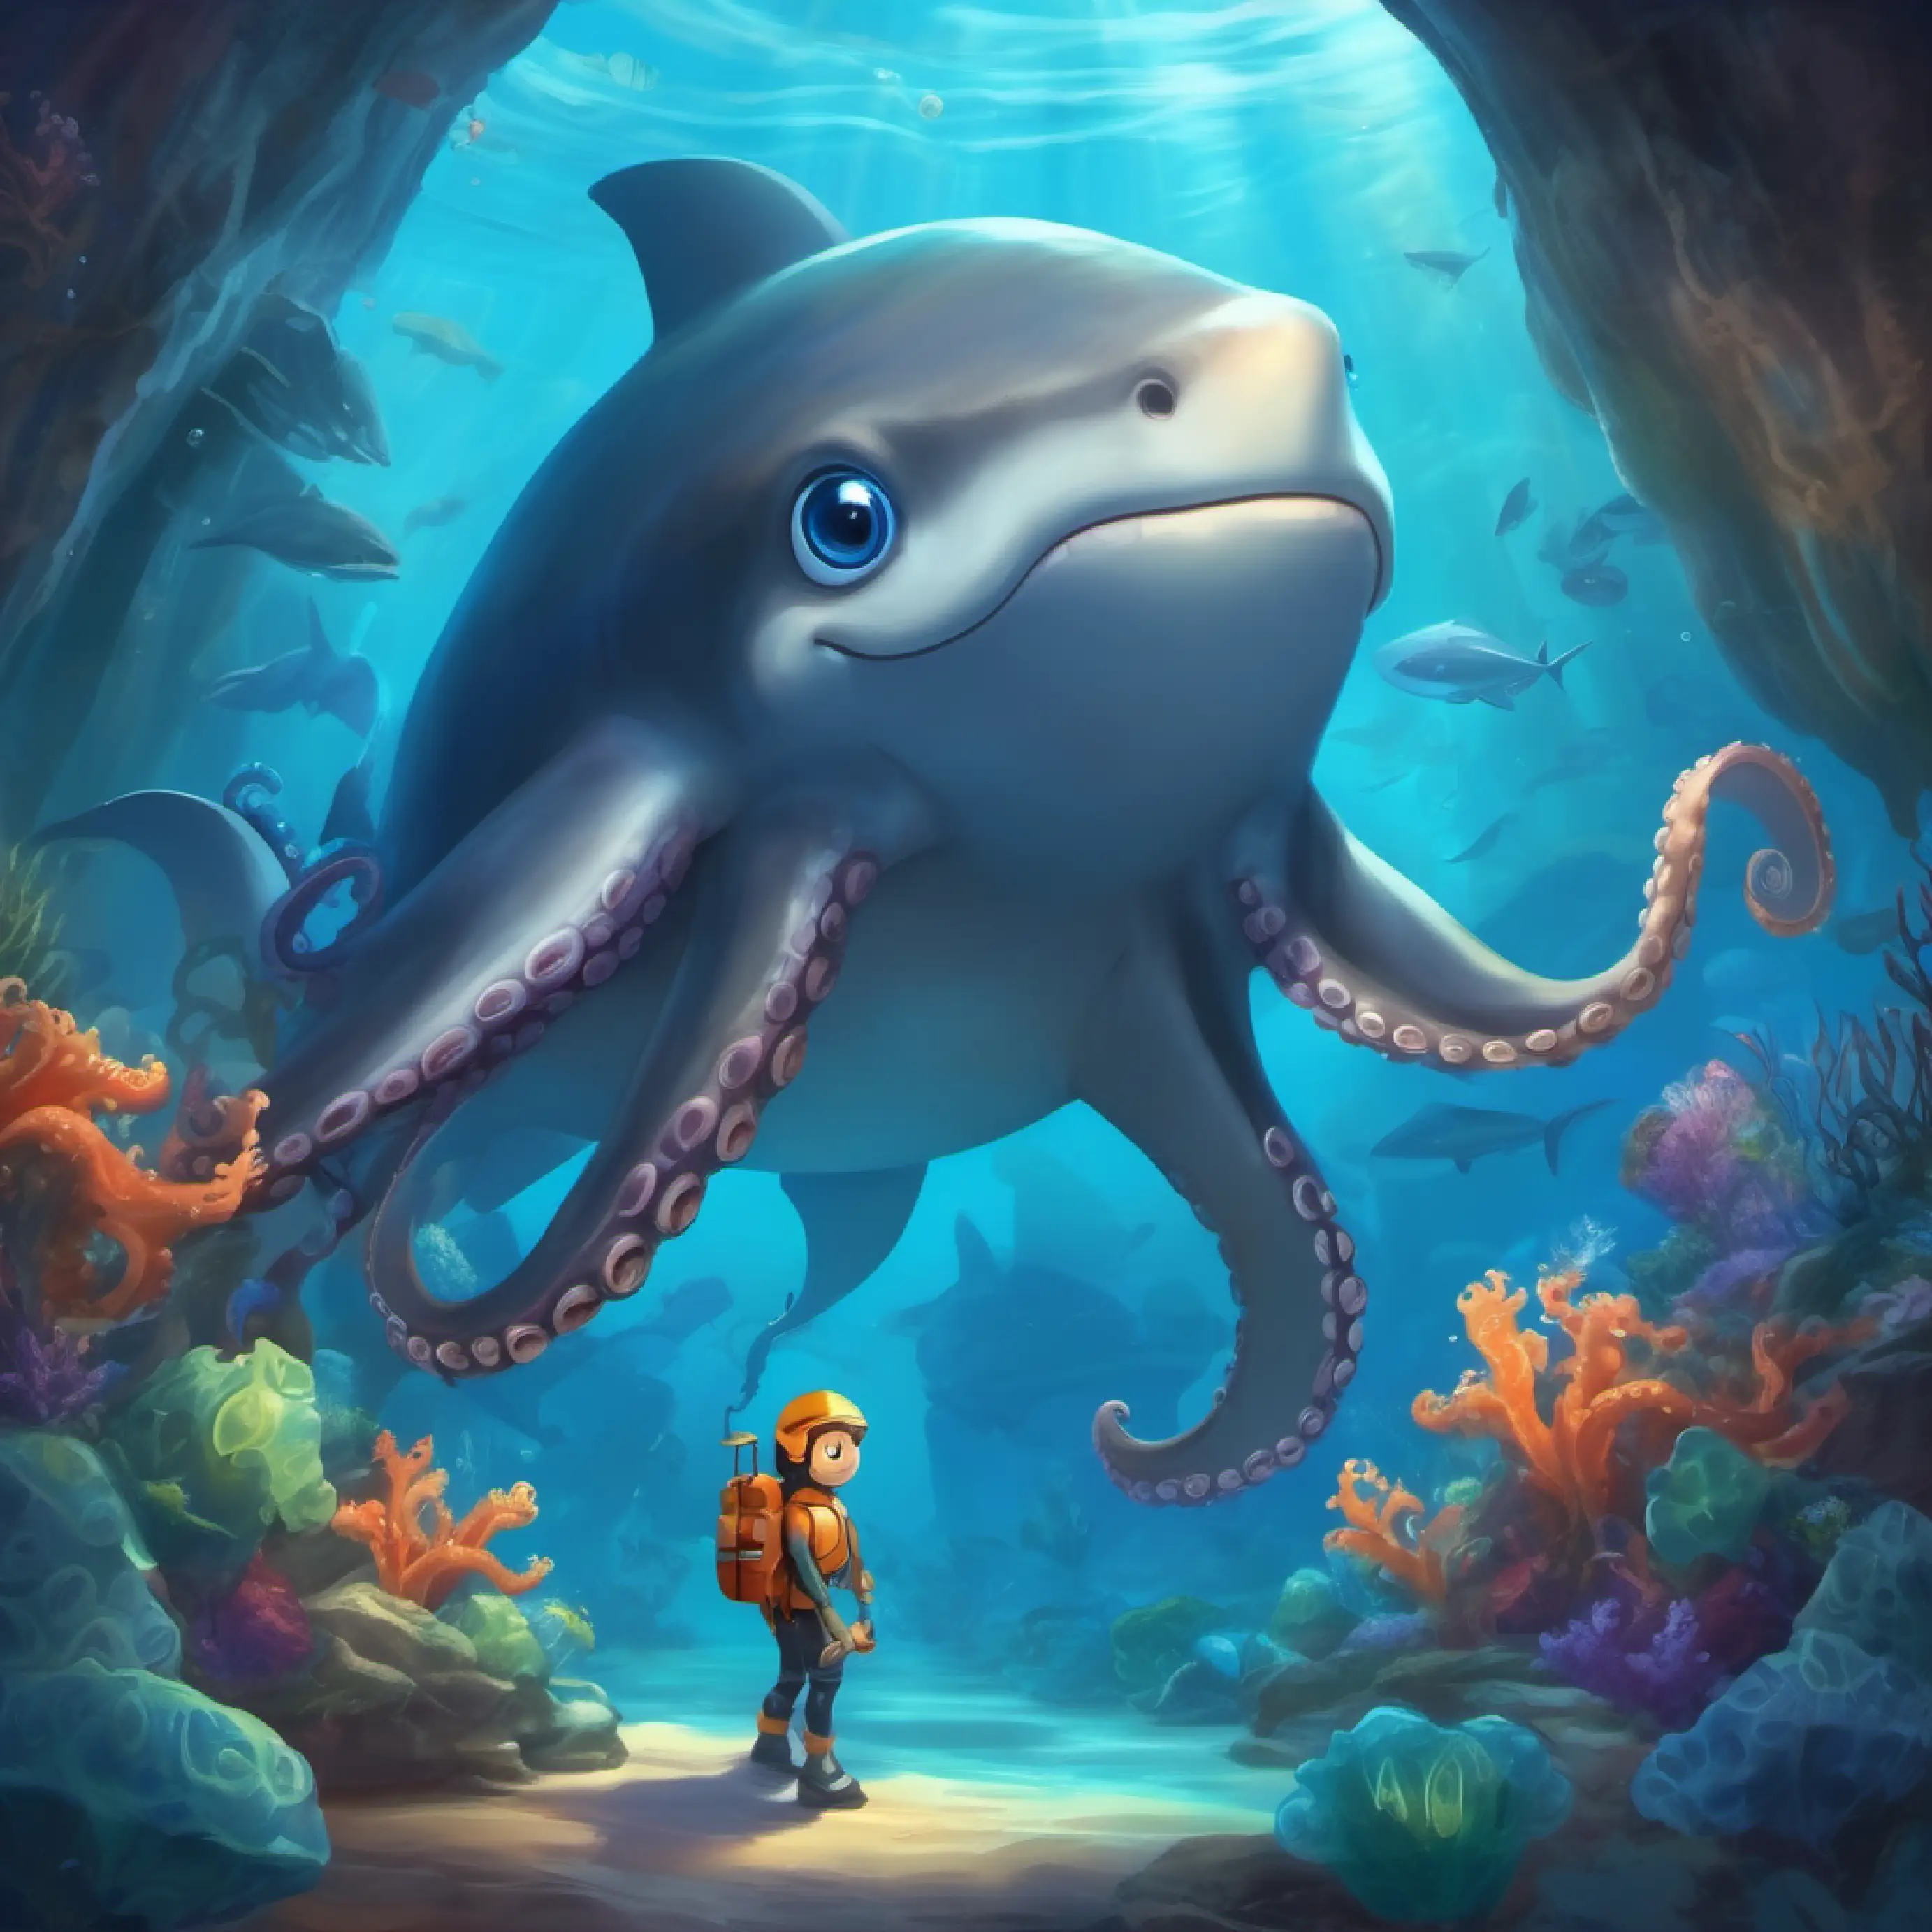 Octopus encounter, Big, friendly shark with a shiny smile Blue-gray skin, bright twinkling eyes's heroic act, deep-sea cave transformation.